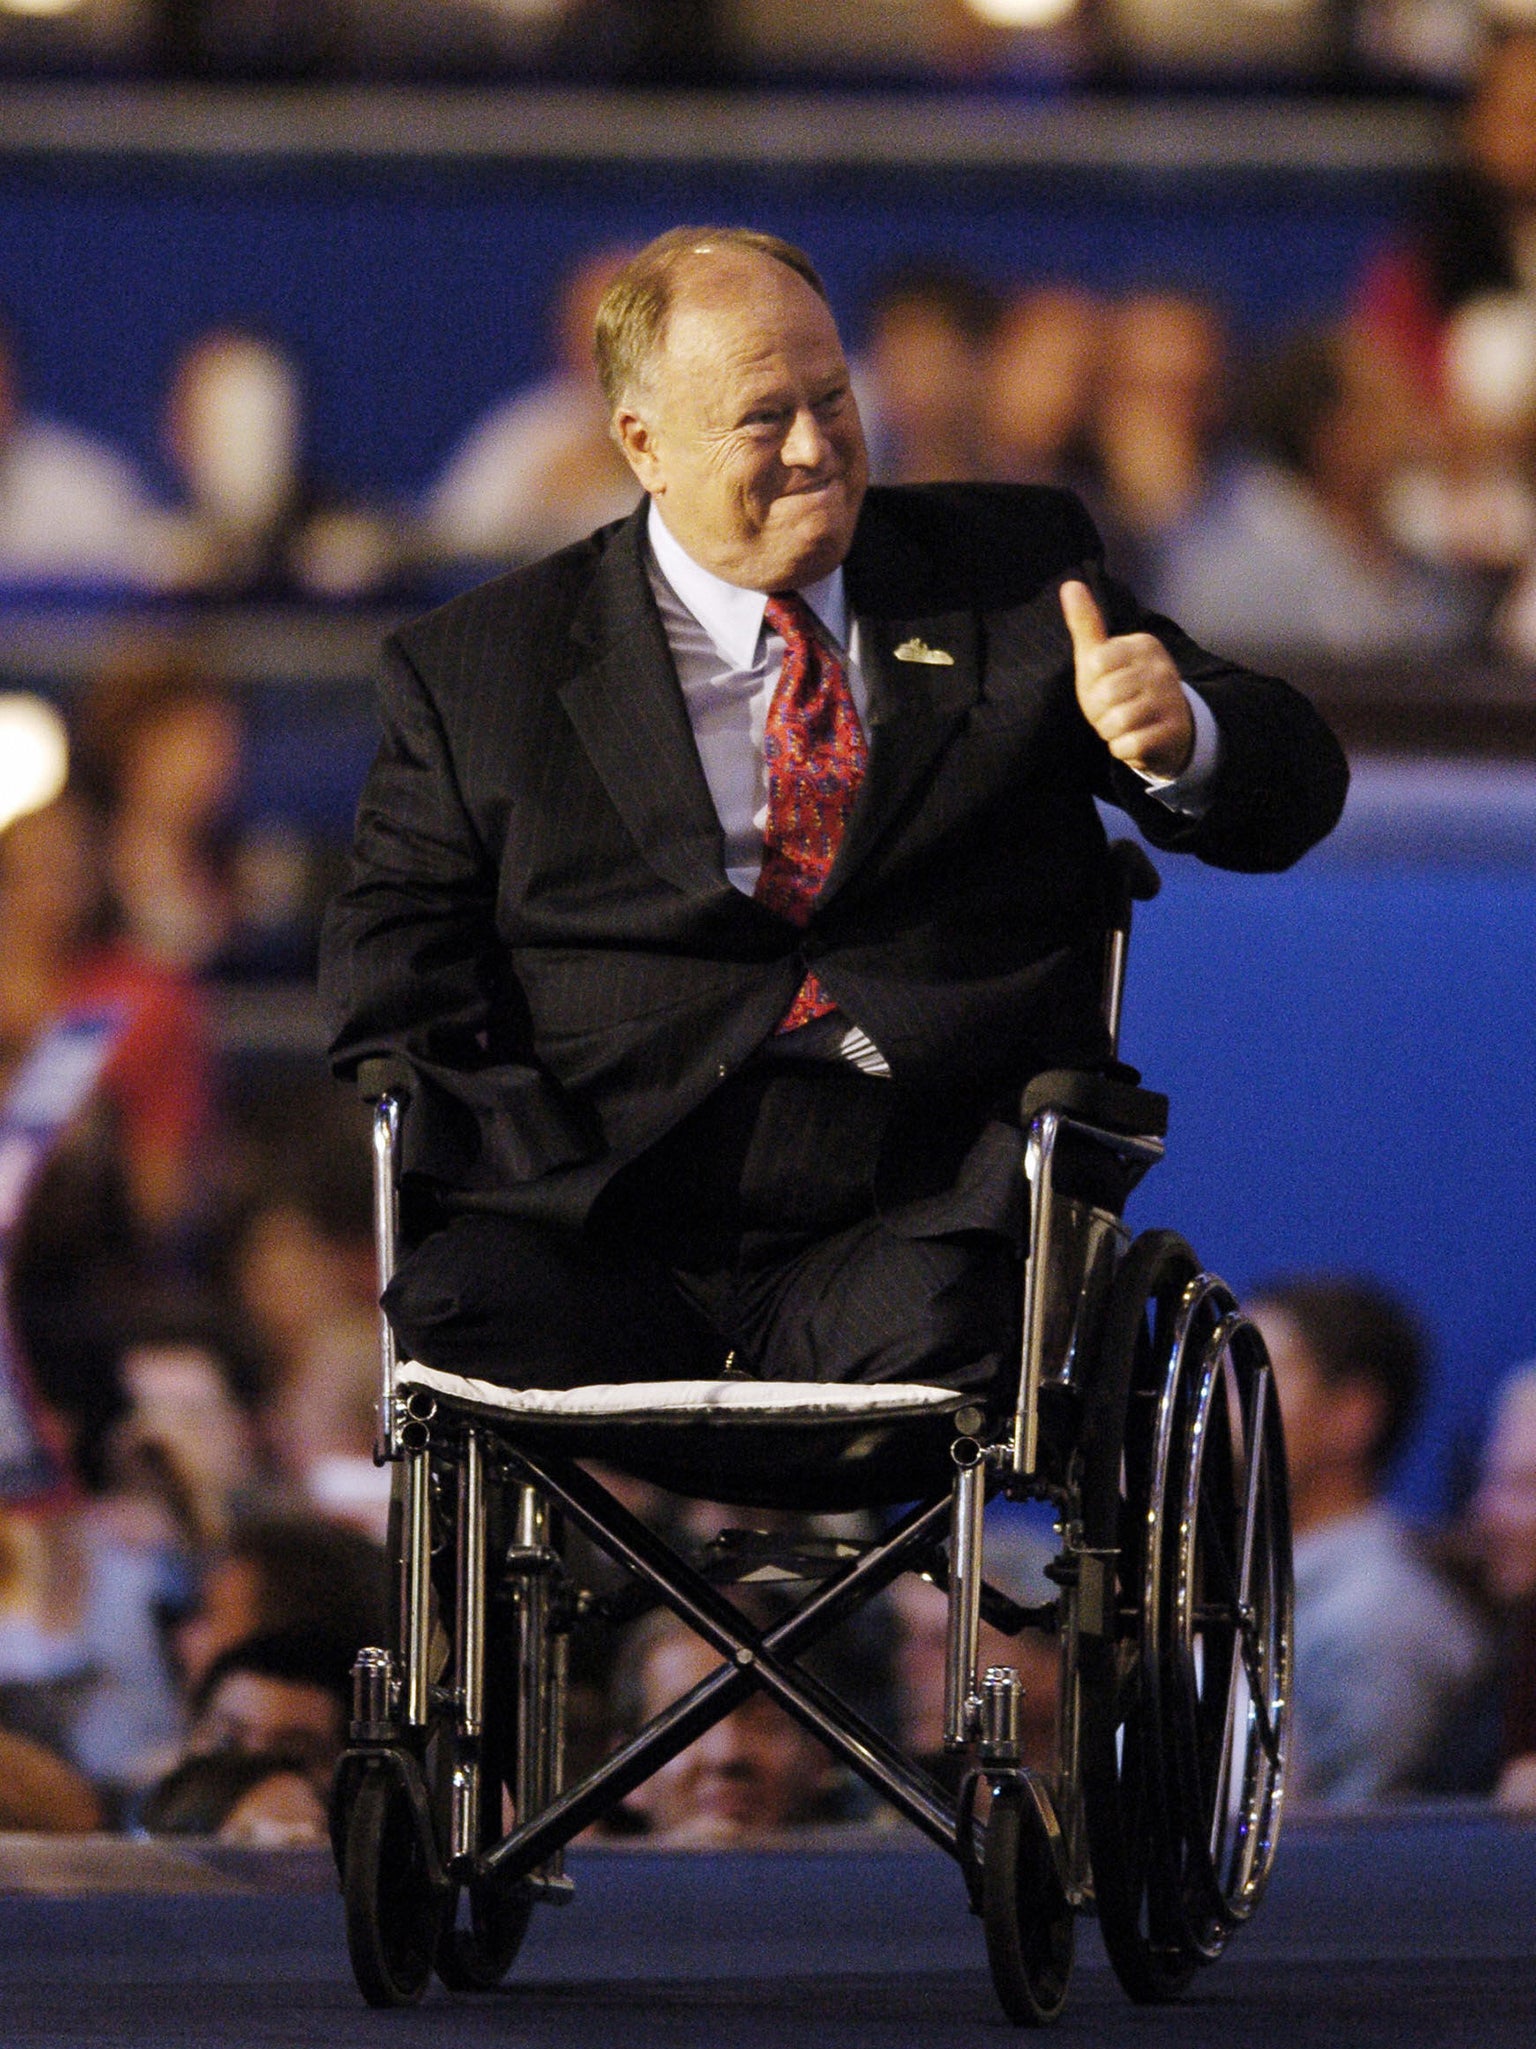 Arriving on stage during the final night of the 2004 Democratic National Convention in Boston